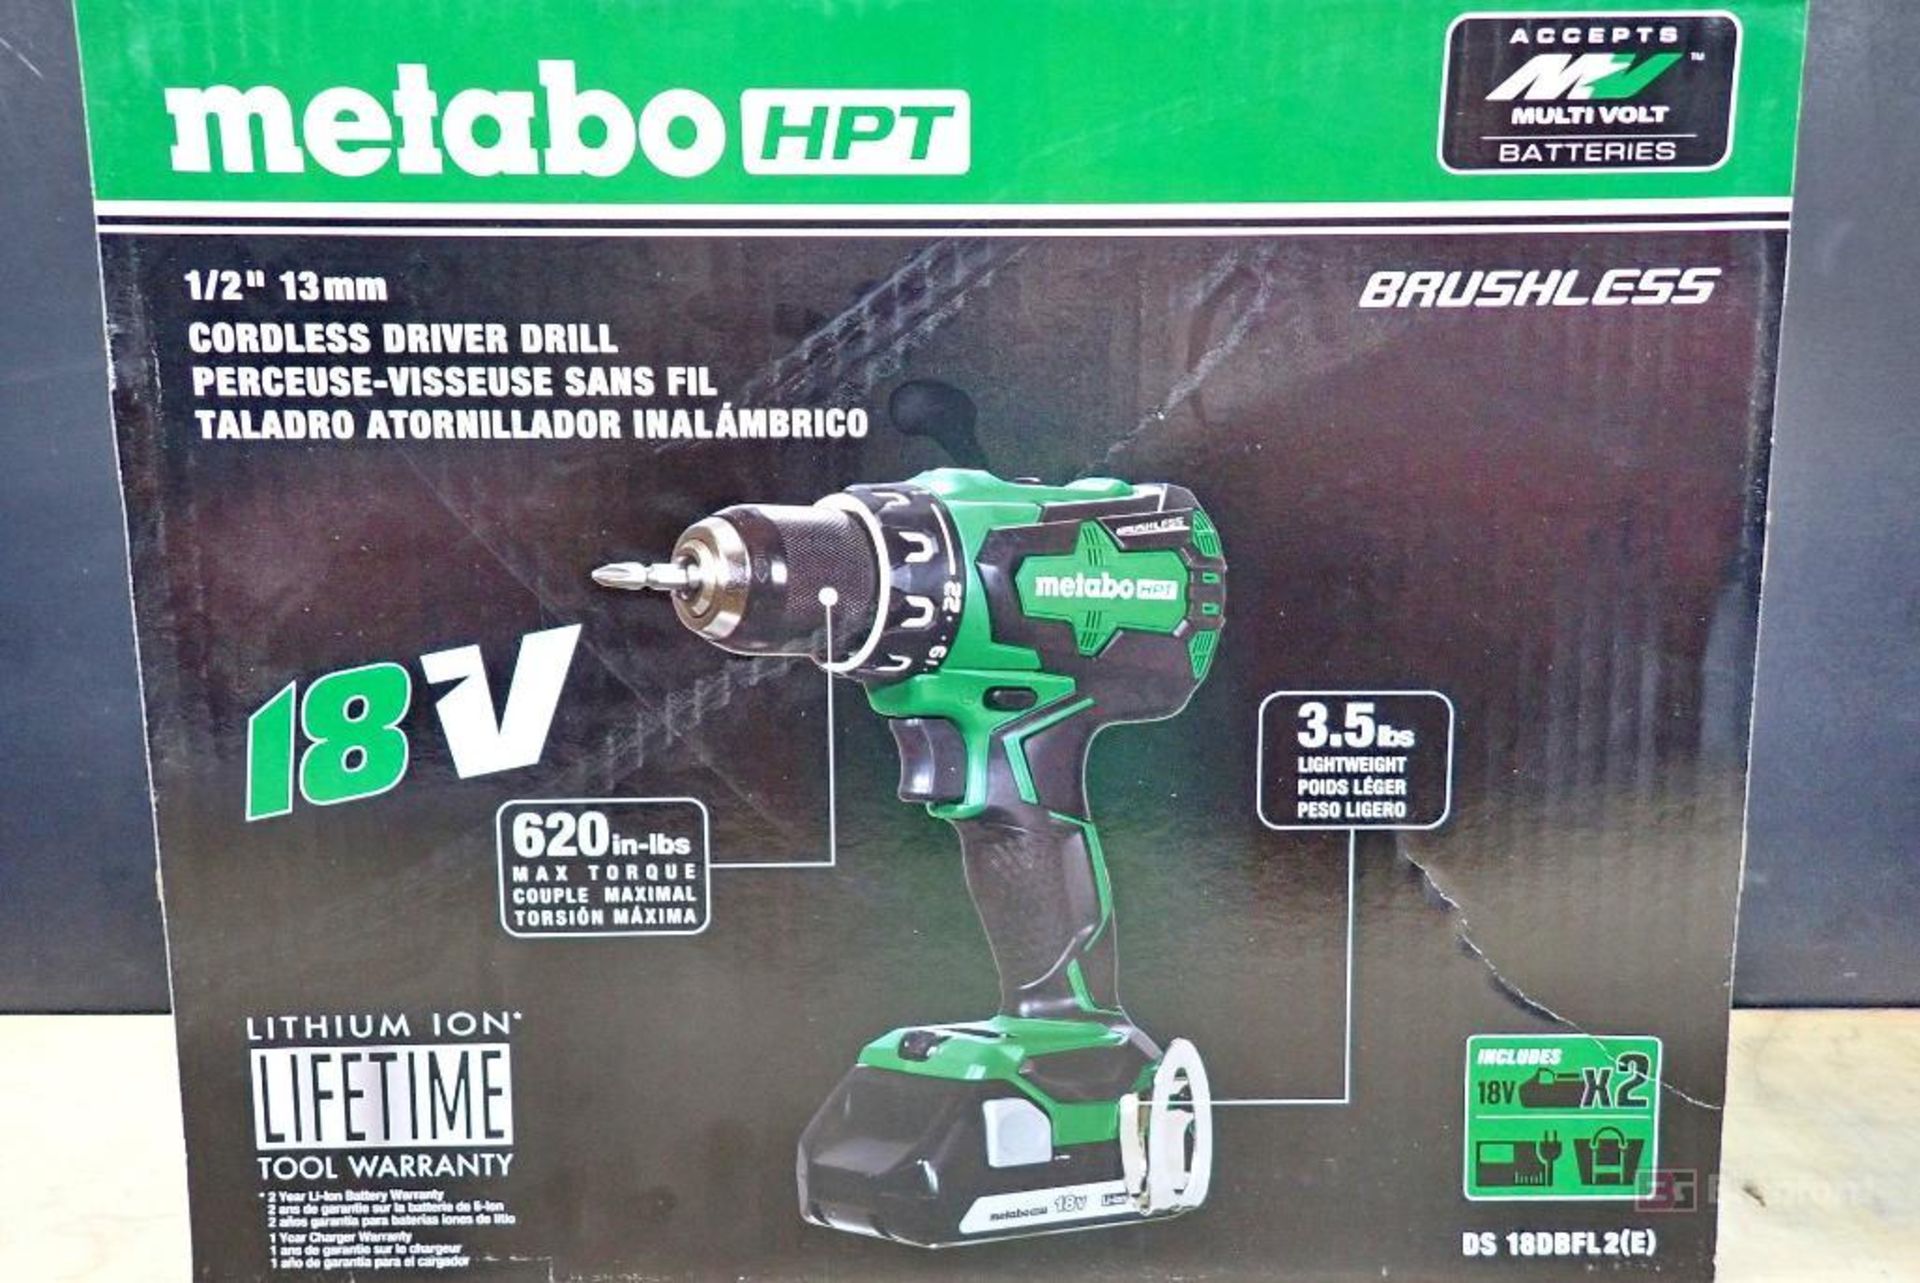 Metabo HPT DS 18DBFL2(E) 1/2" 13mm Cordless Driver Drill - Image 2 of 5